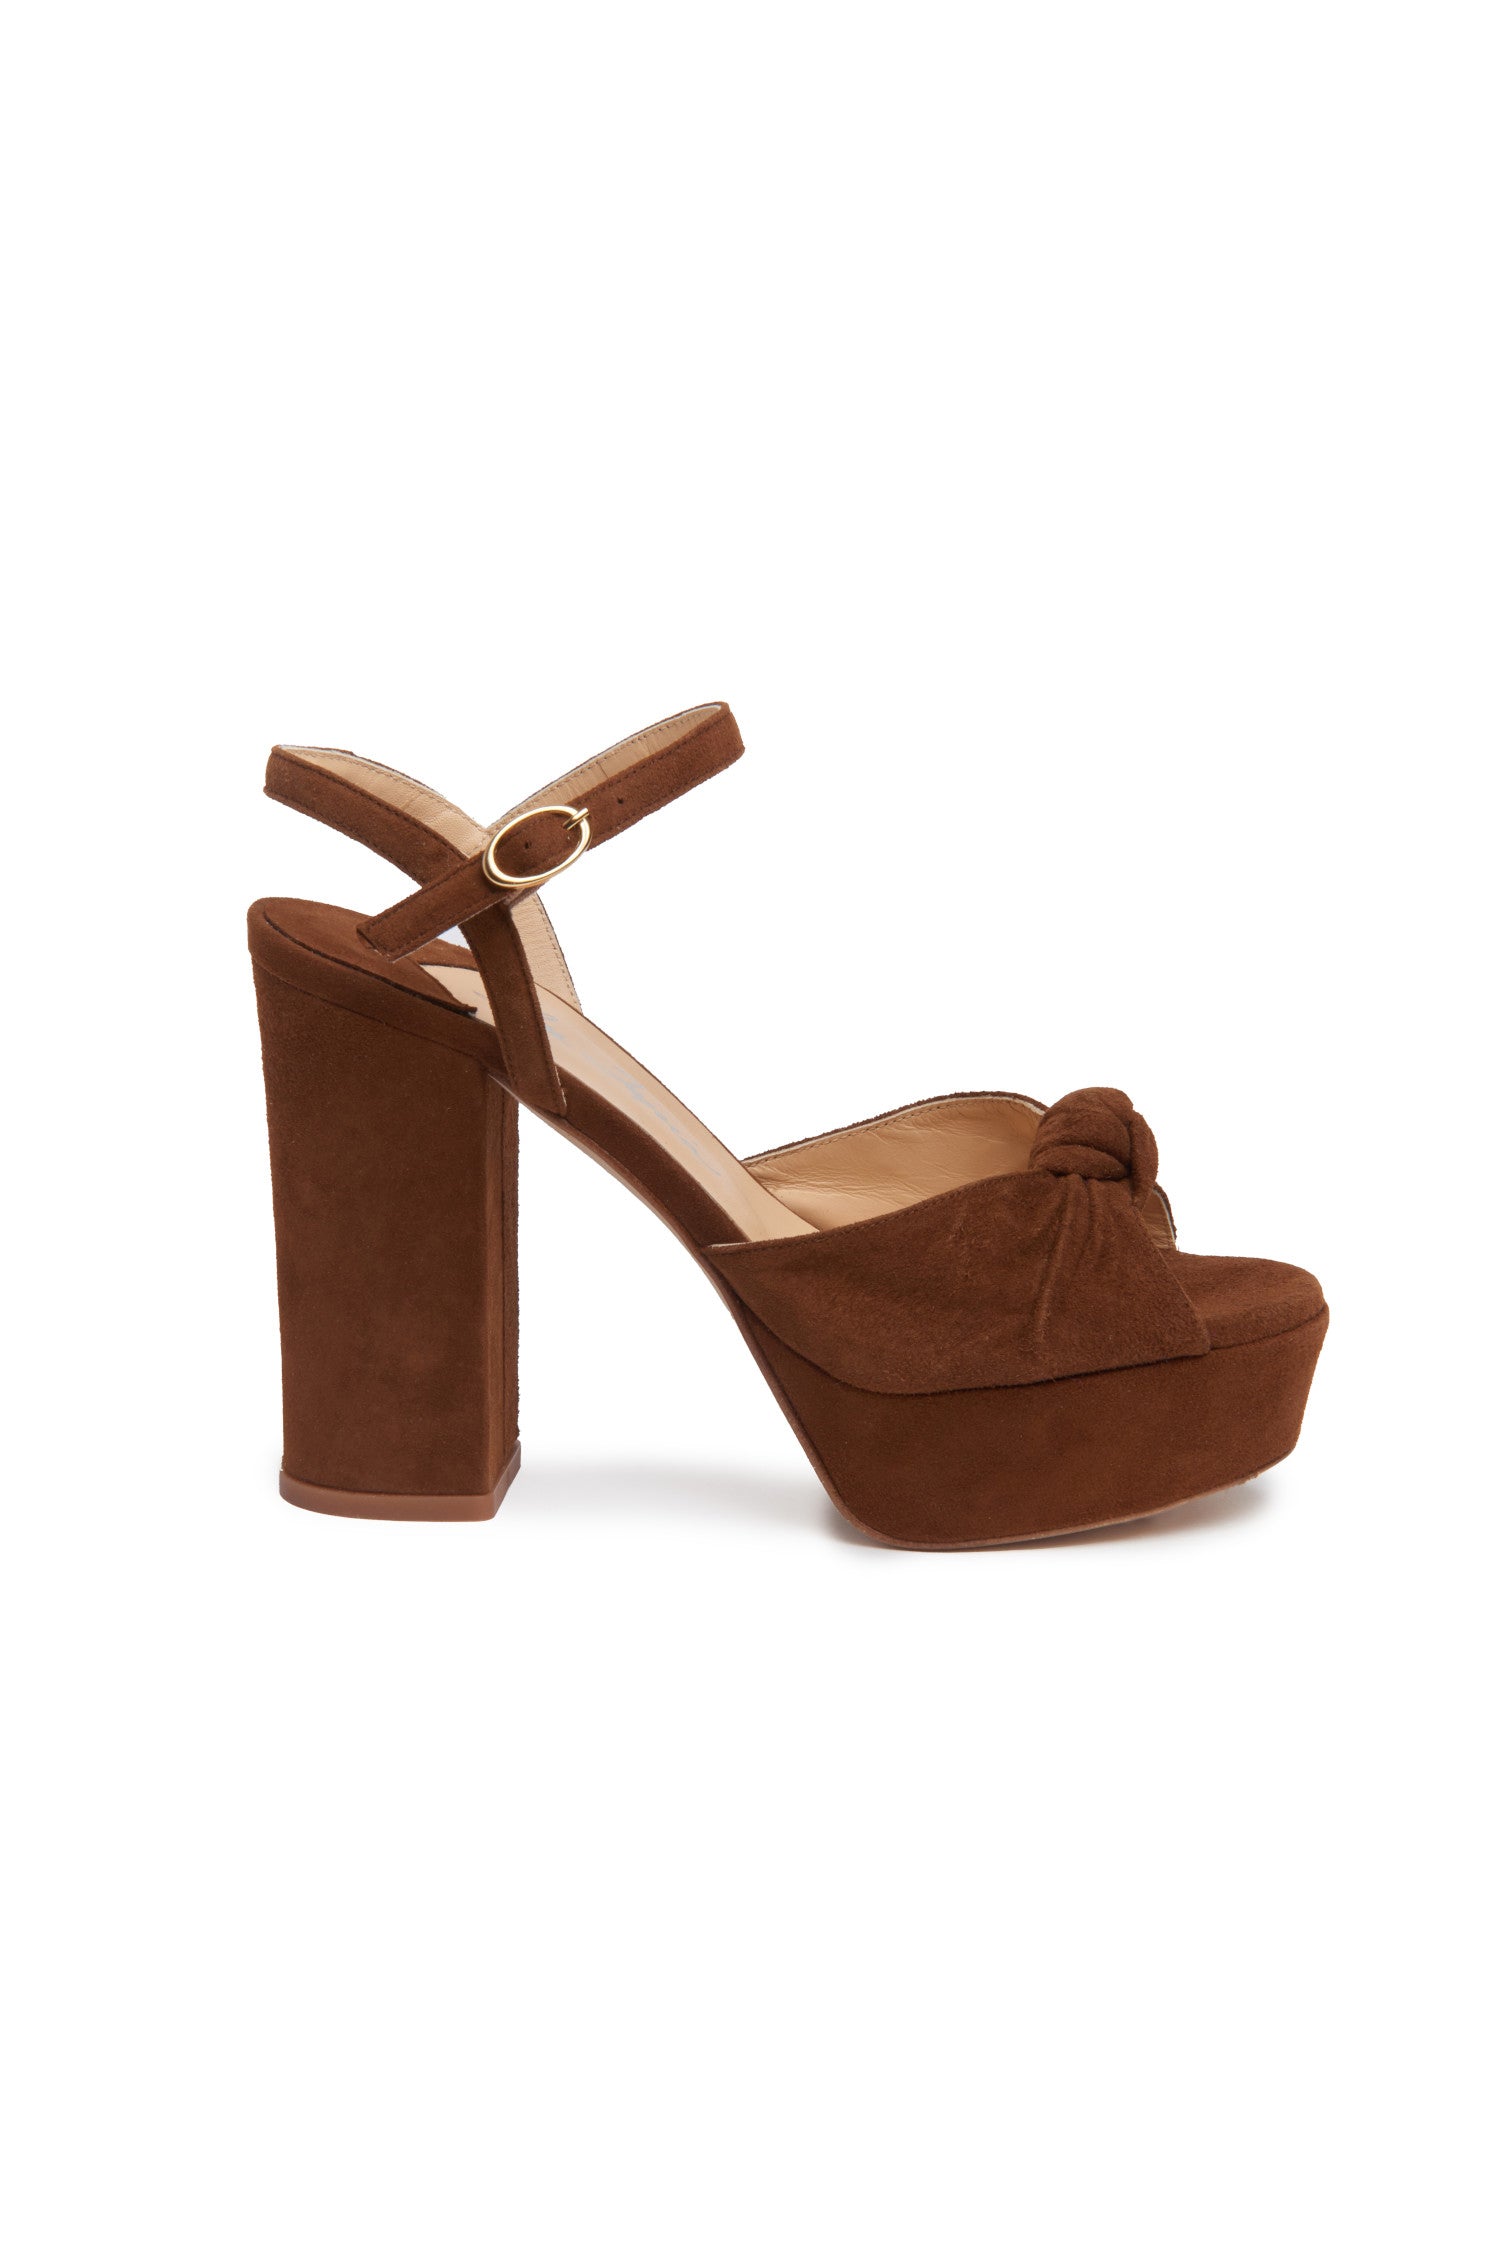 Brown sandal heals with platform and knot on top